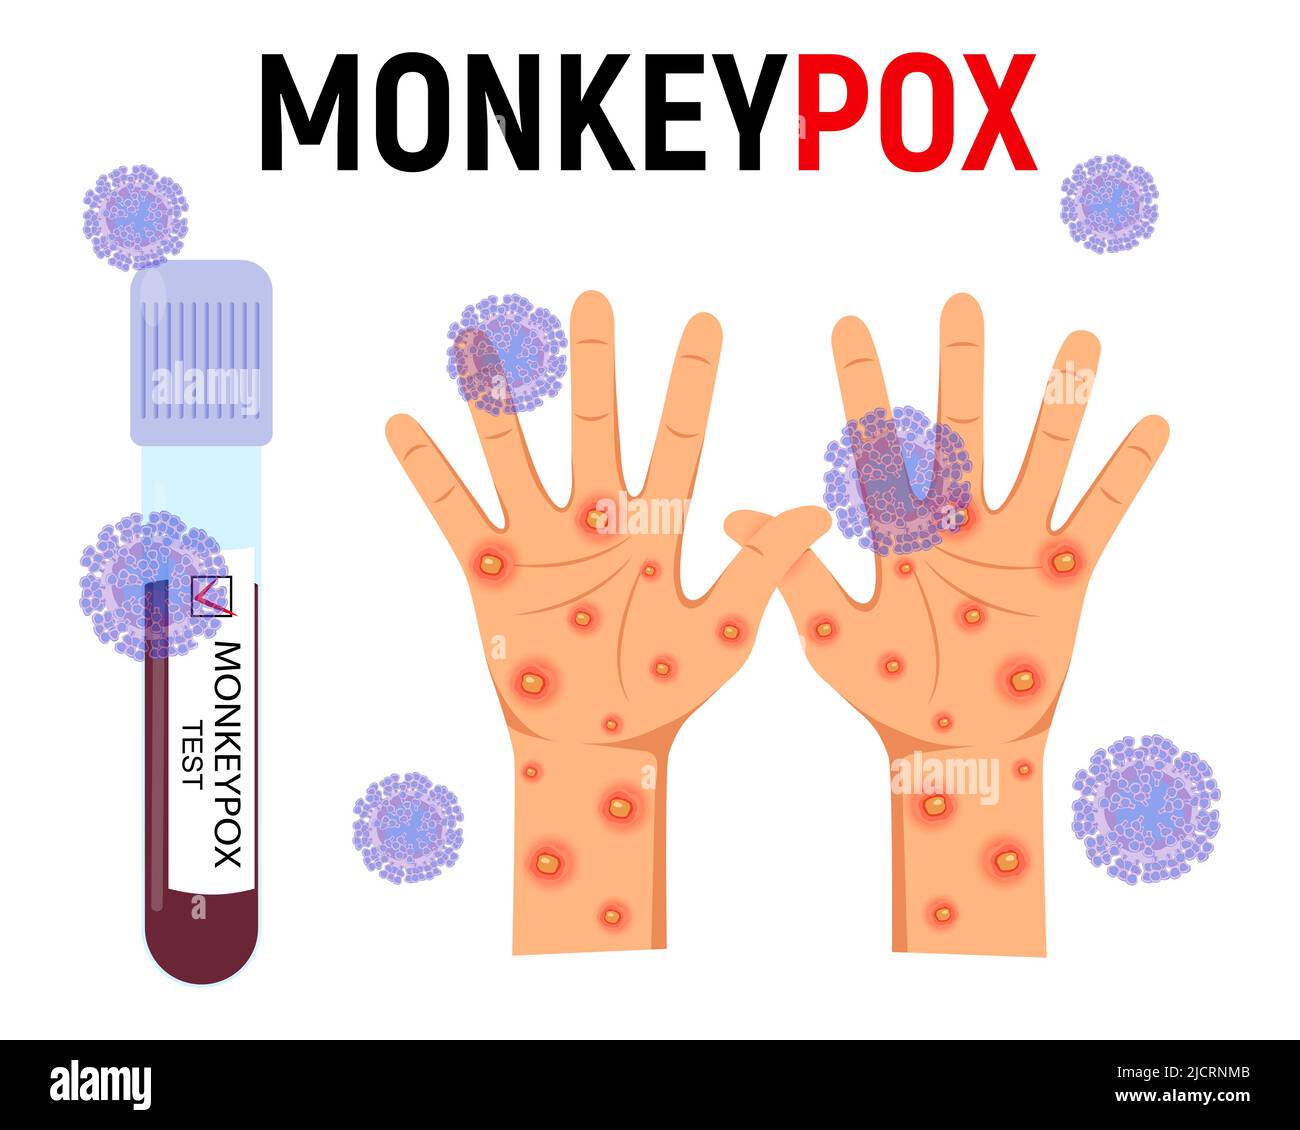 Monkey pox background. A test tube with blood for a test and a human hand with a rash and ulcers surrounded by viral cells on a white background Stock Vector